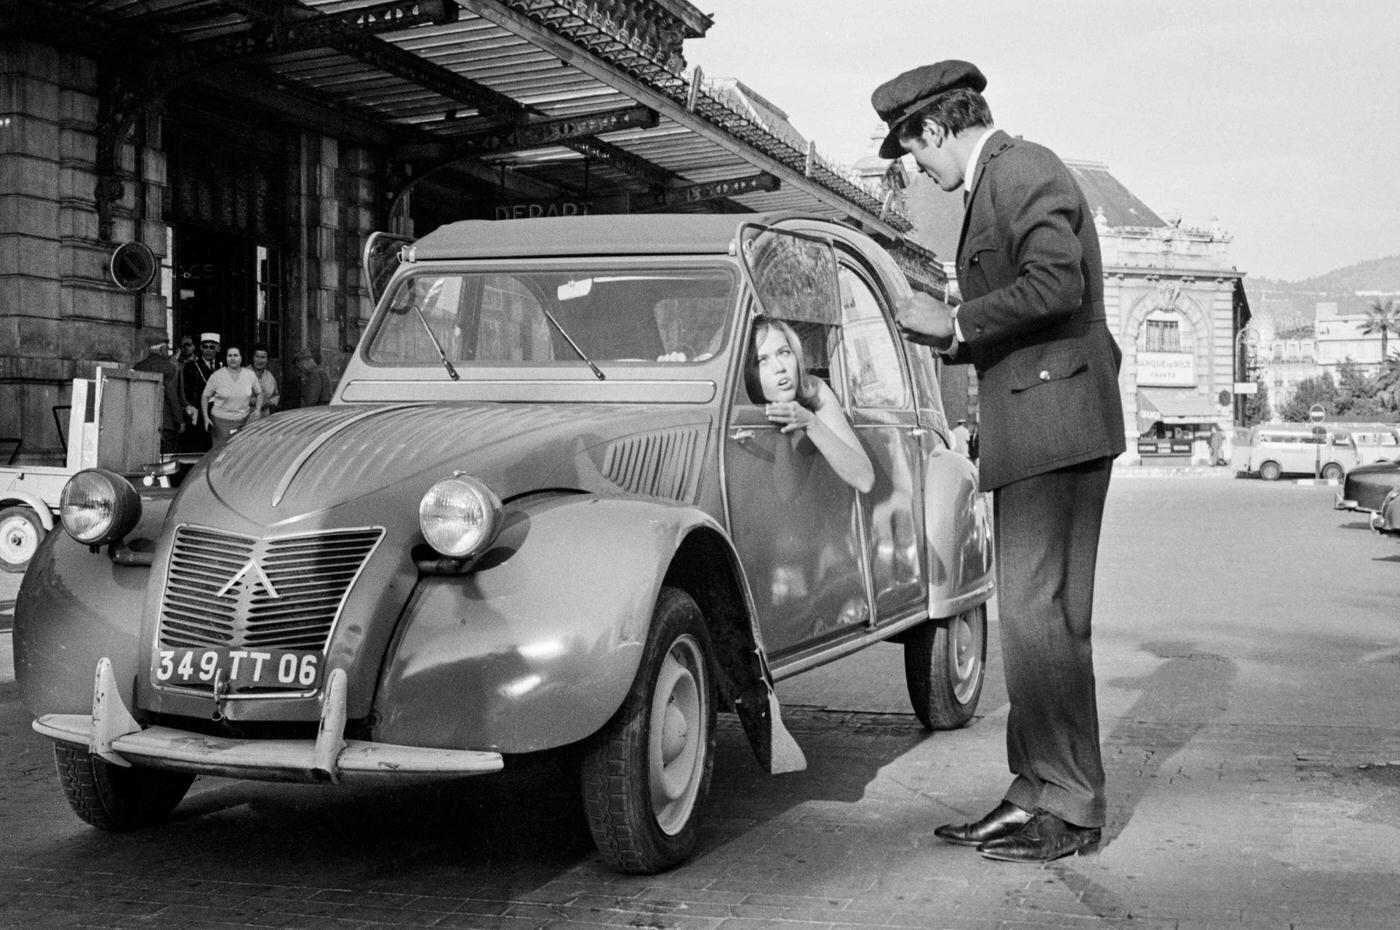 Jane Fonda and Alain Delon in a Citroën 2CV during the filming of "Les Félins" on the French Riviera, 1963.